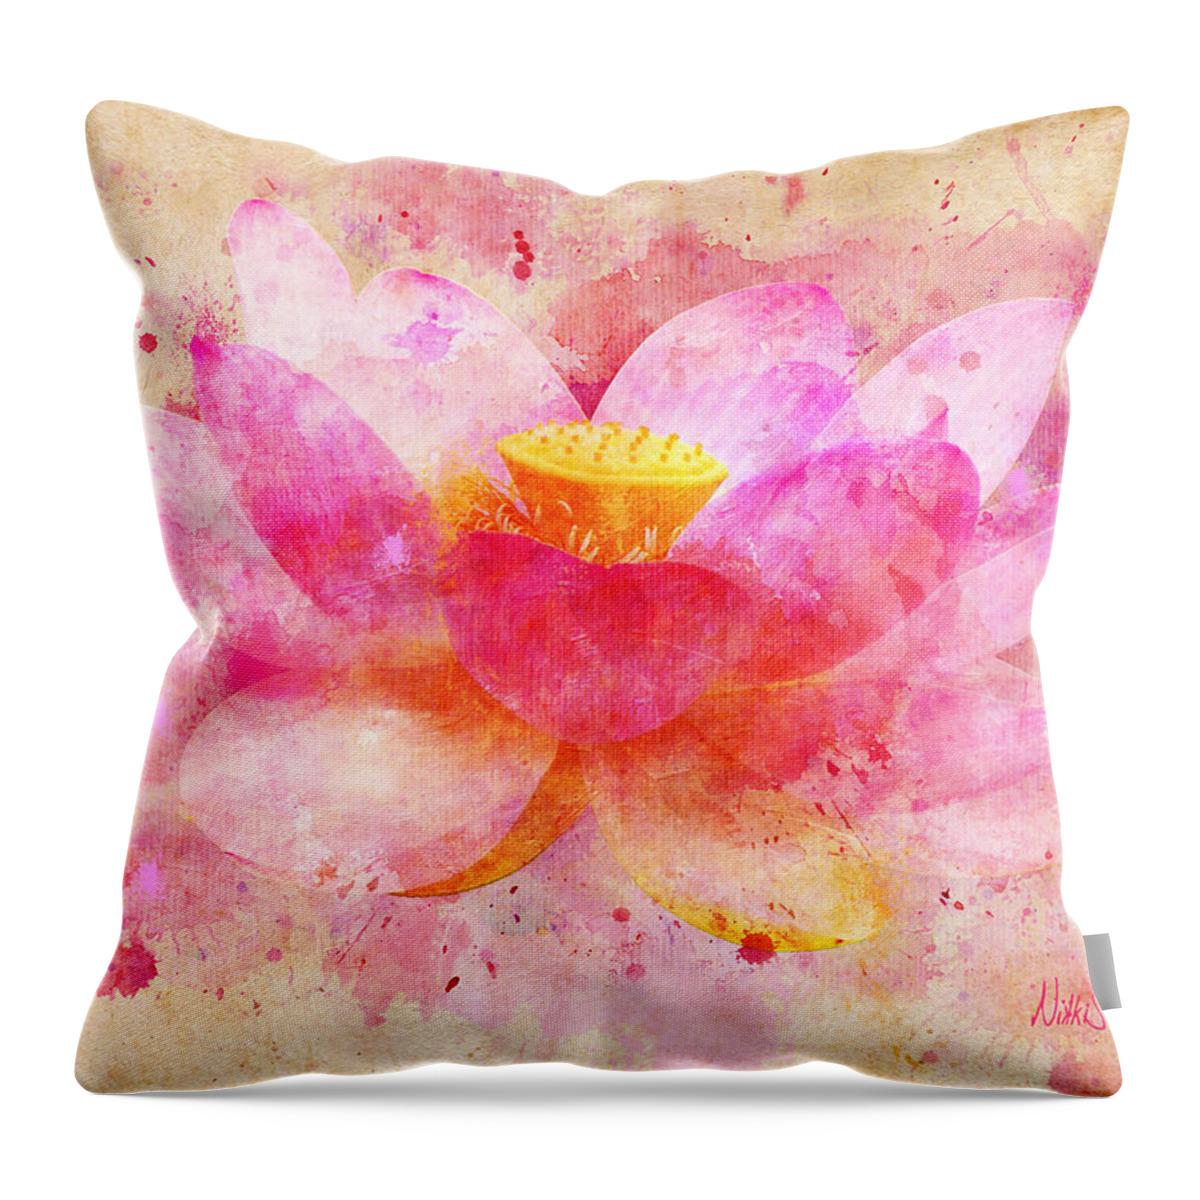 Lotus Throw Pillow featuring the digital art Pink Lotus Flower Abstract Artwork by Nikki Marie Smith